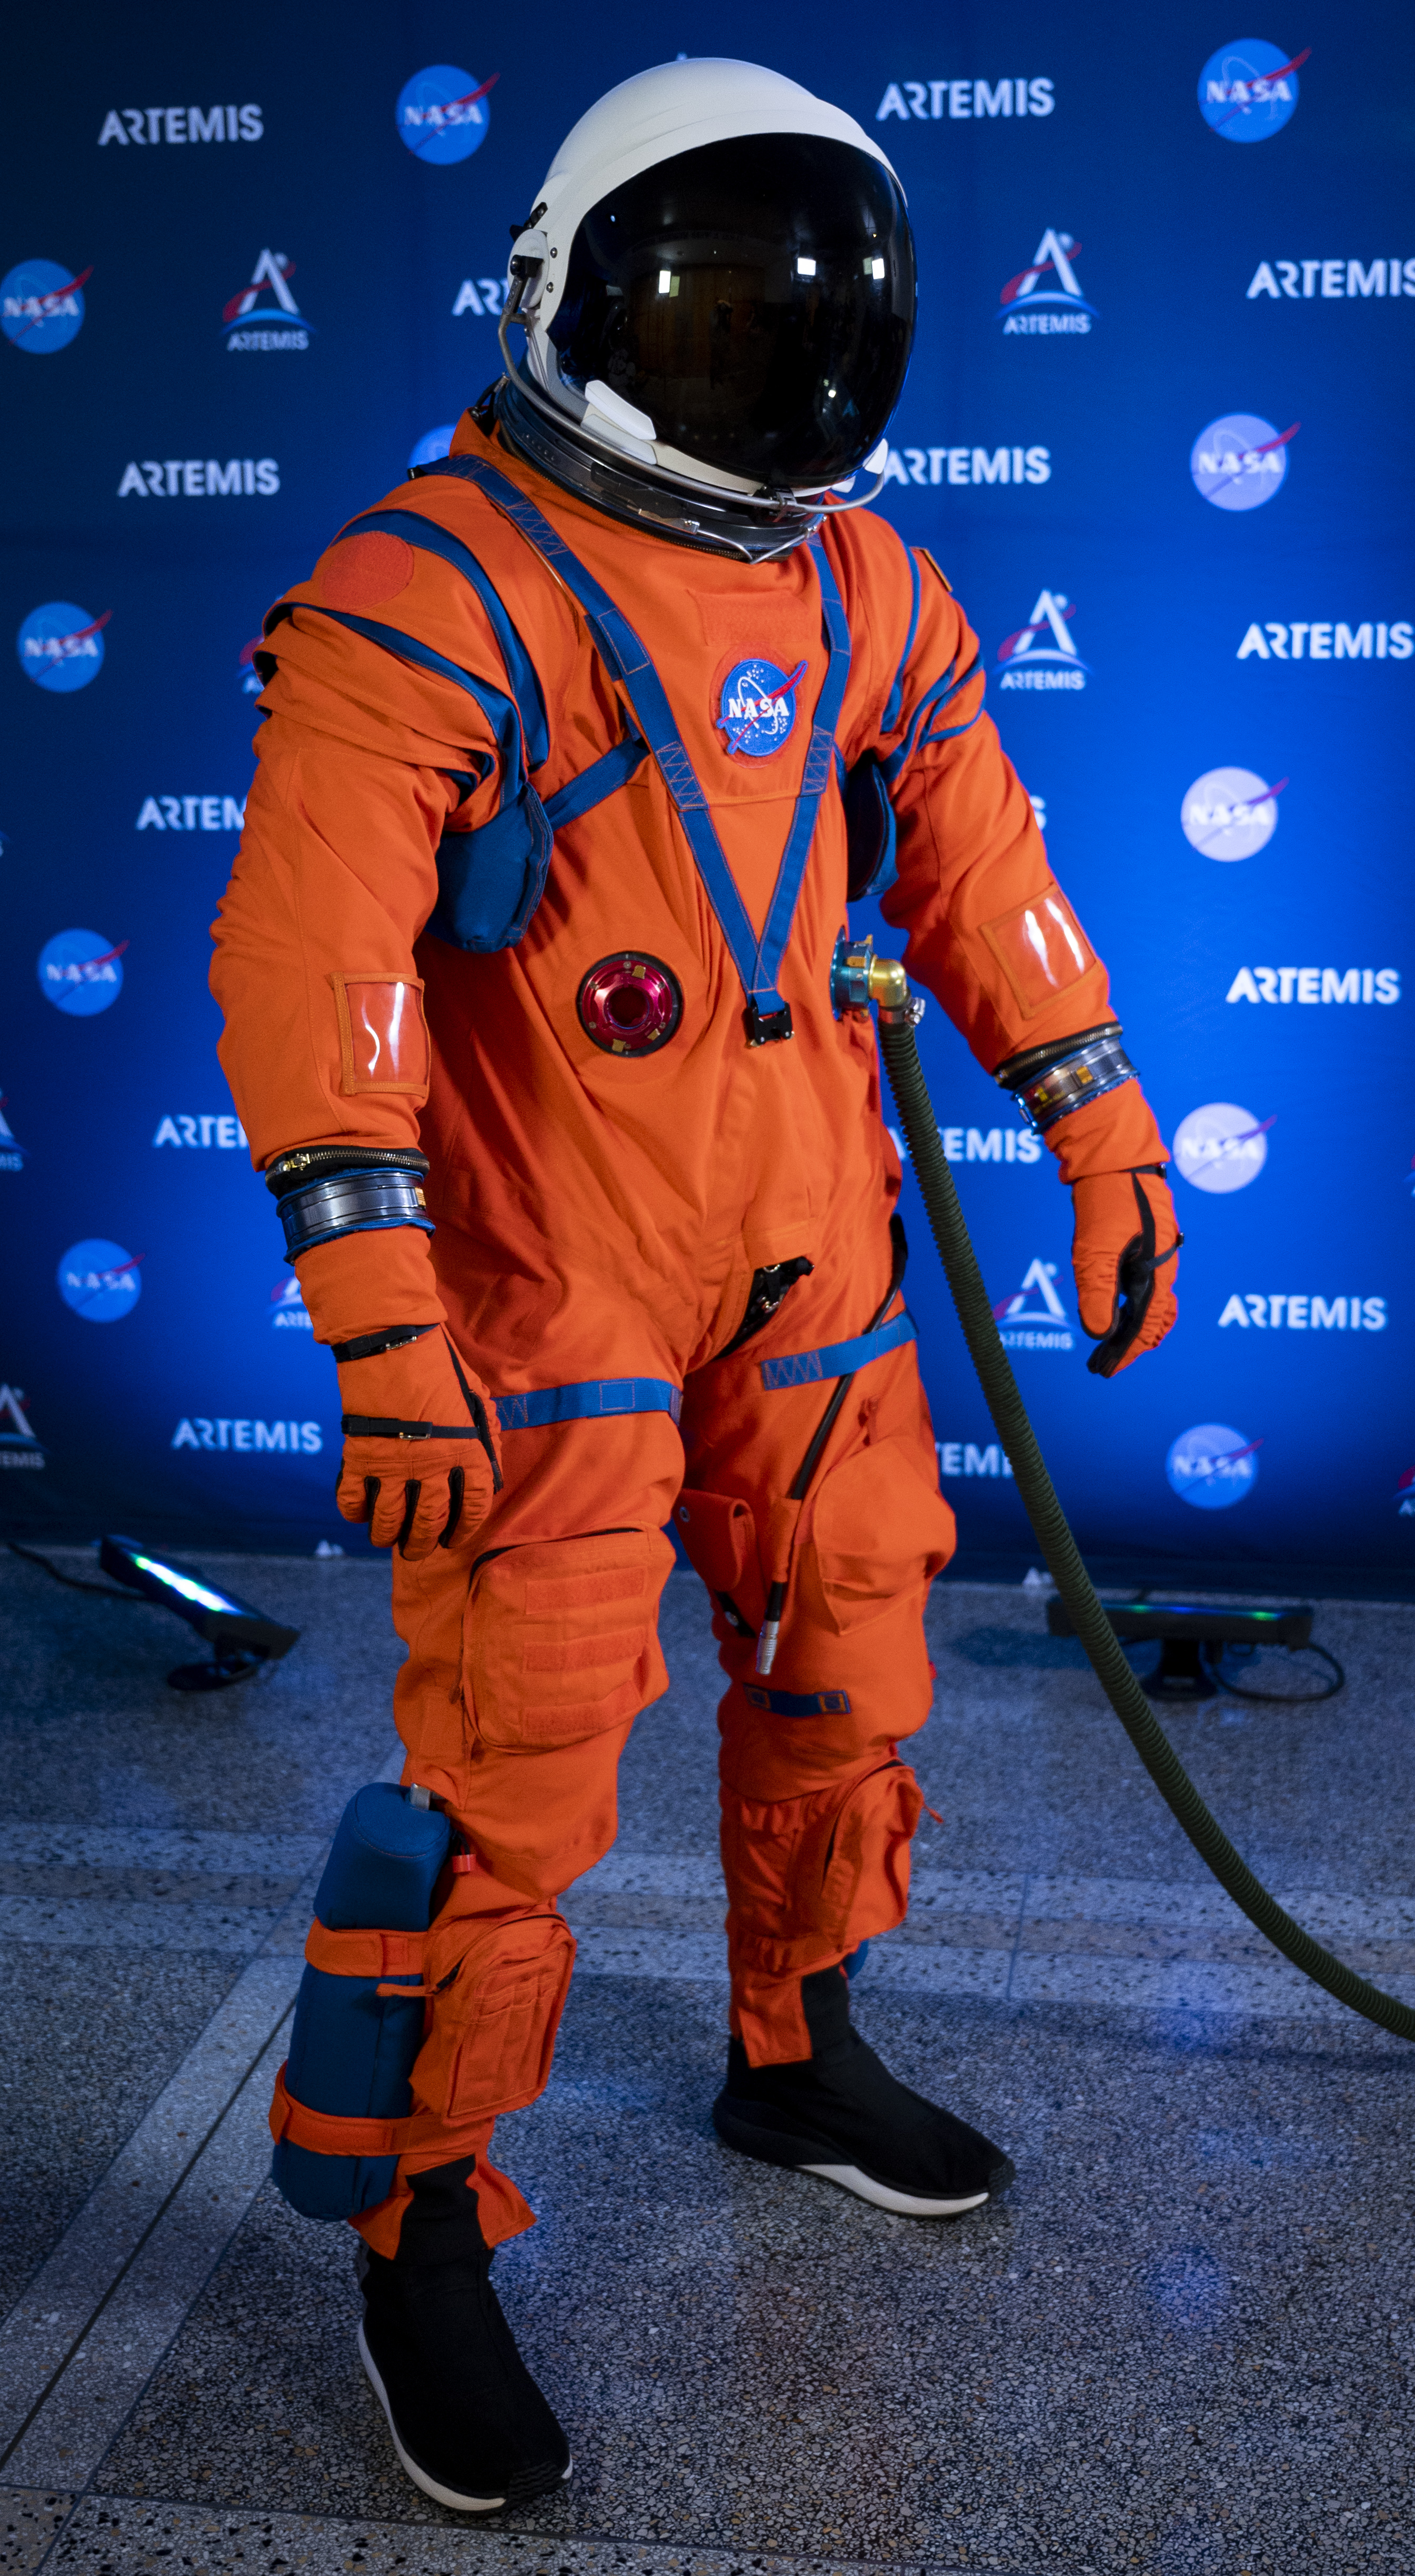 Orion Suit Equipped to Expect the Unexpected on Artemis Missions